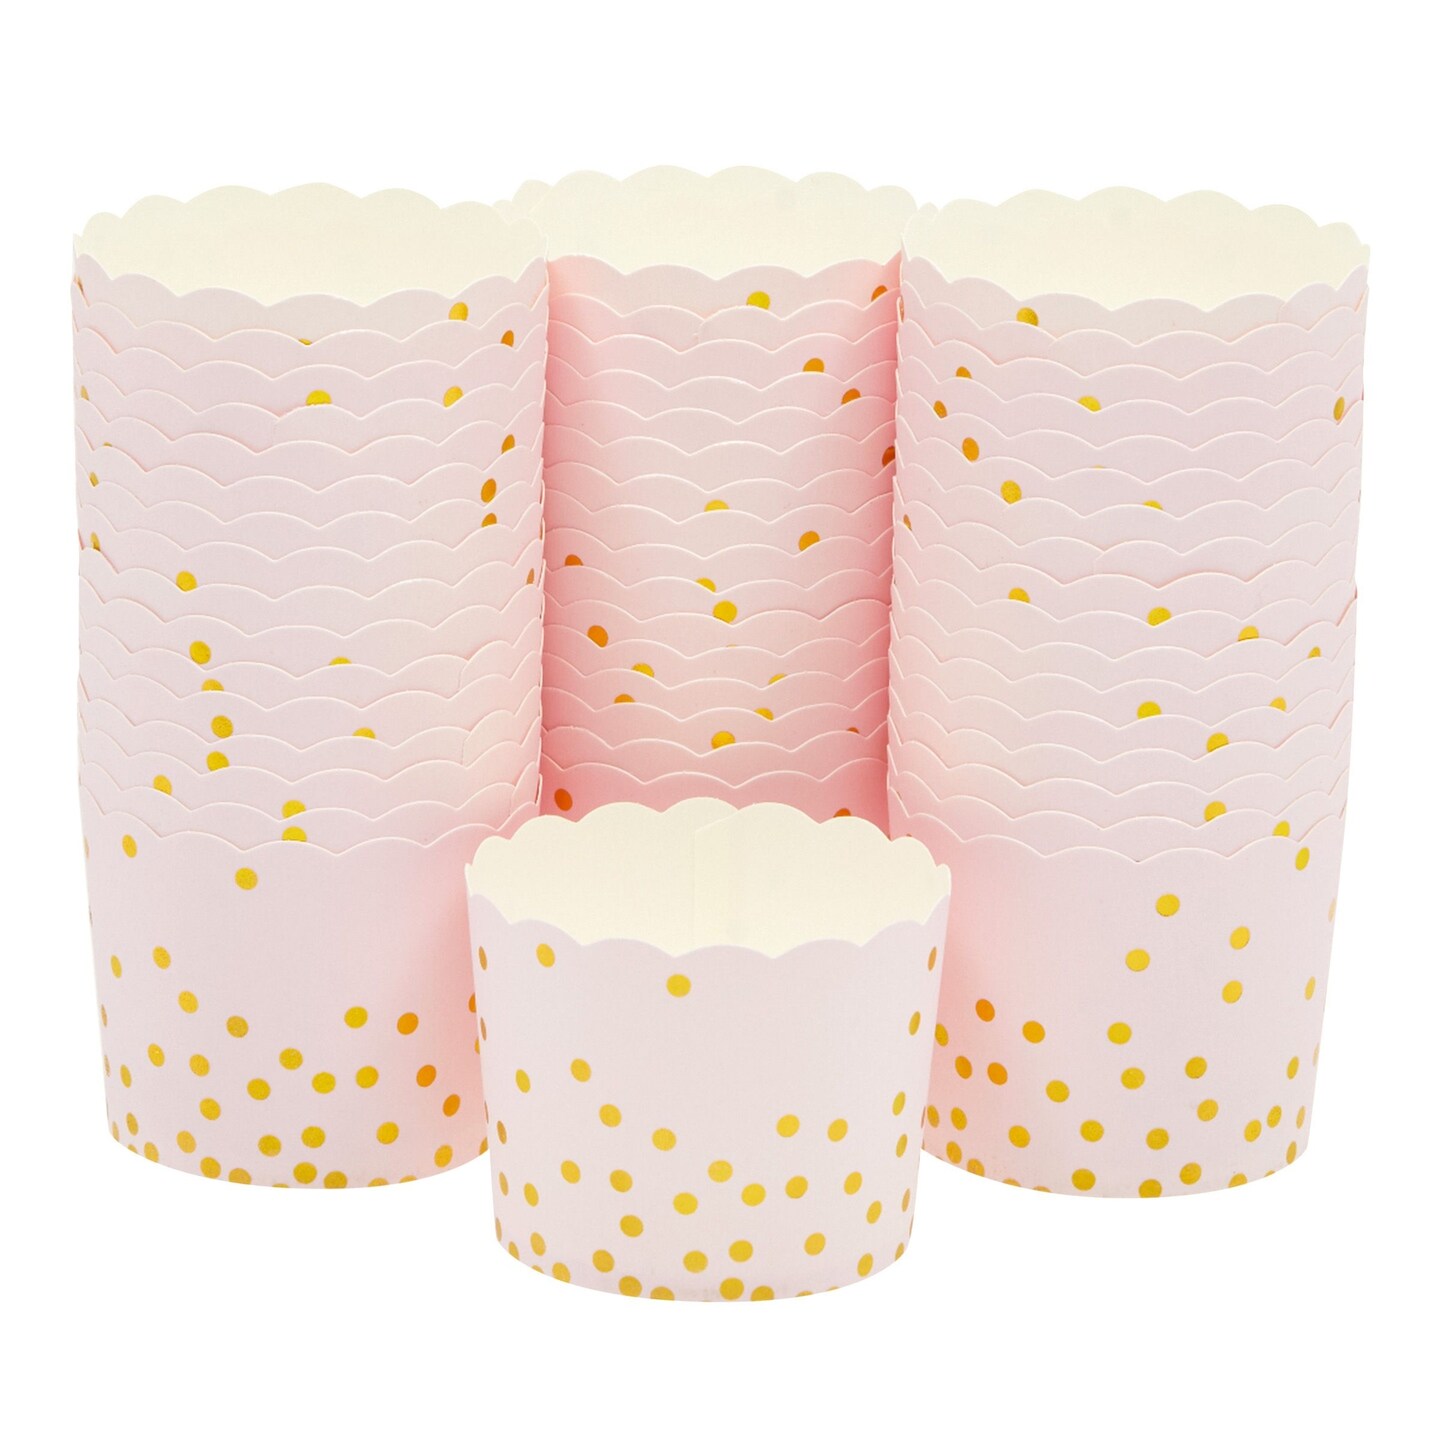 50-Pack Muffin Liners - Vintage Floral Cupcake Wrappers Paper Baking Cups,  Pack - Kroger